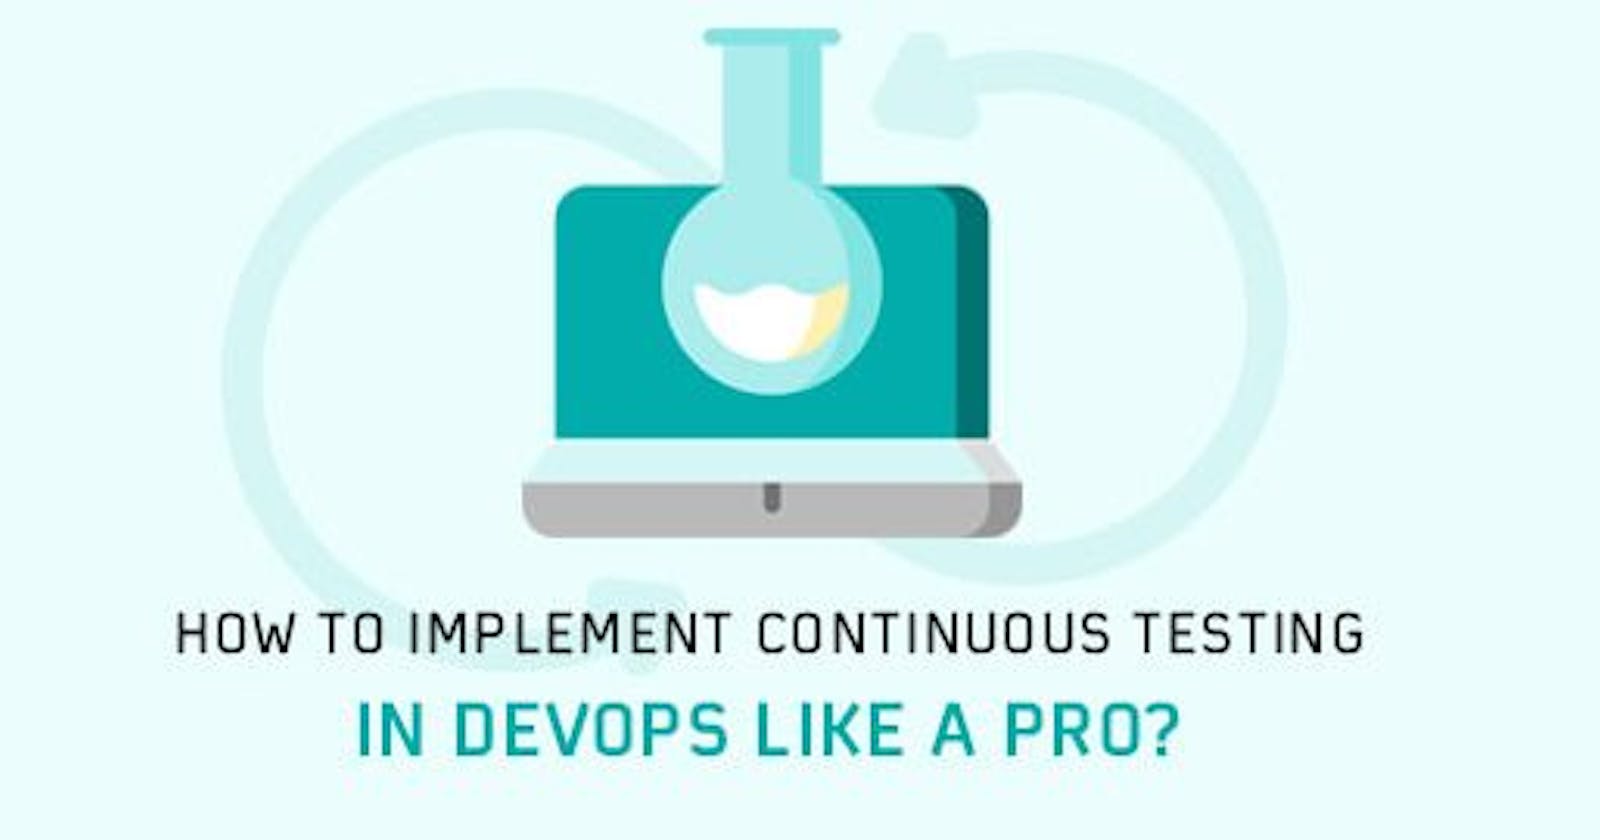 How To Implement Continuous Testing In DevOps Like A Pro?